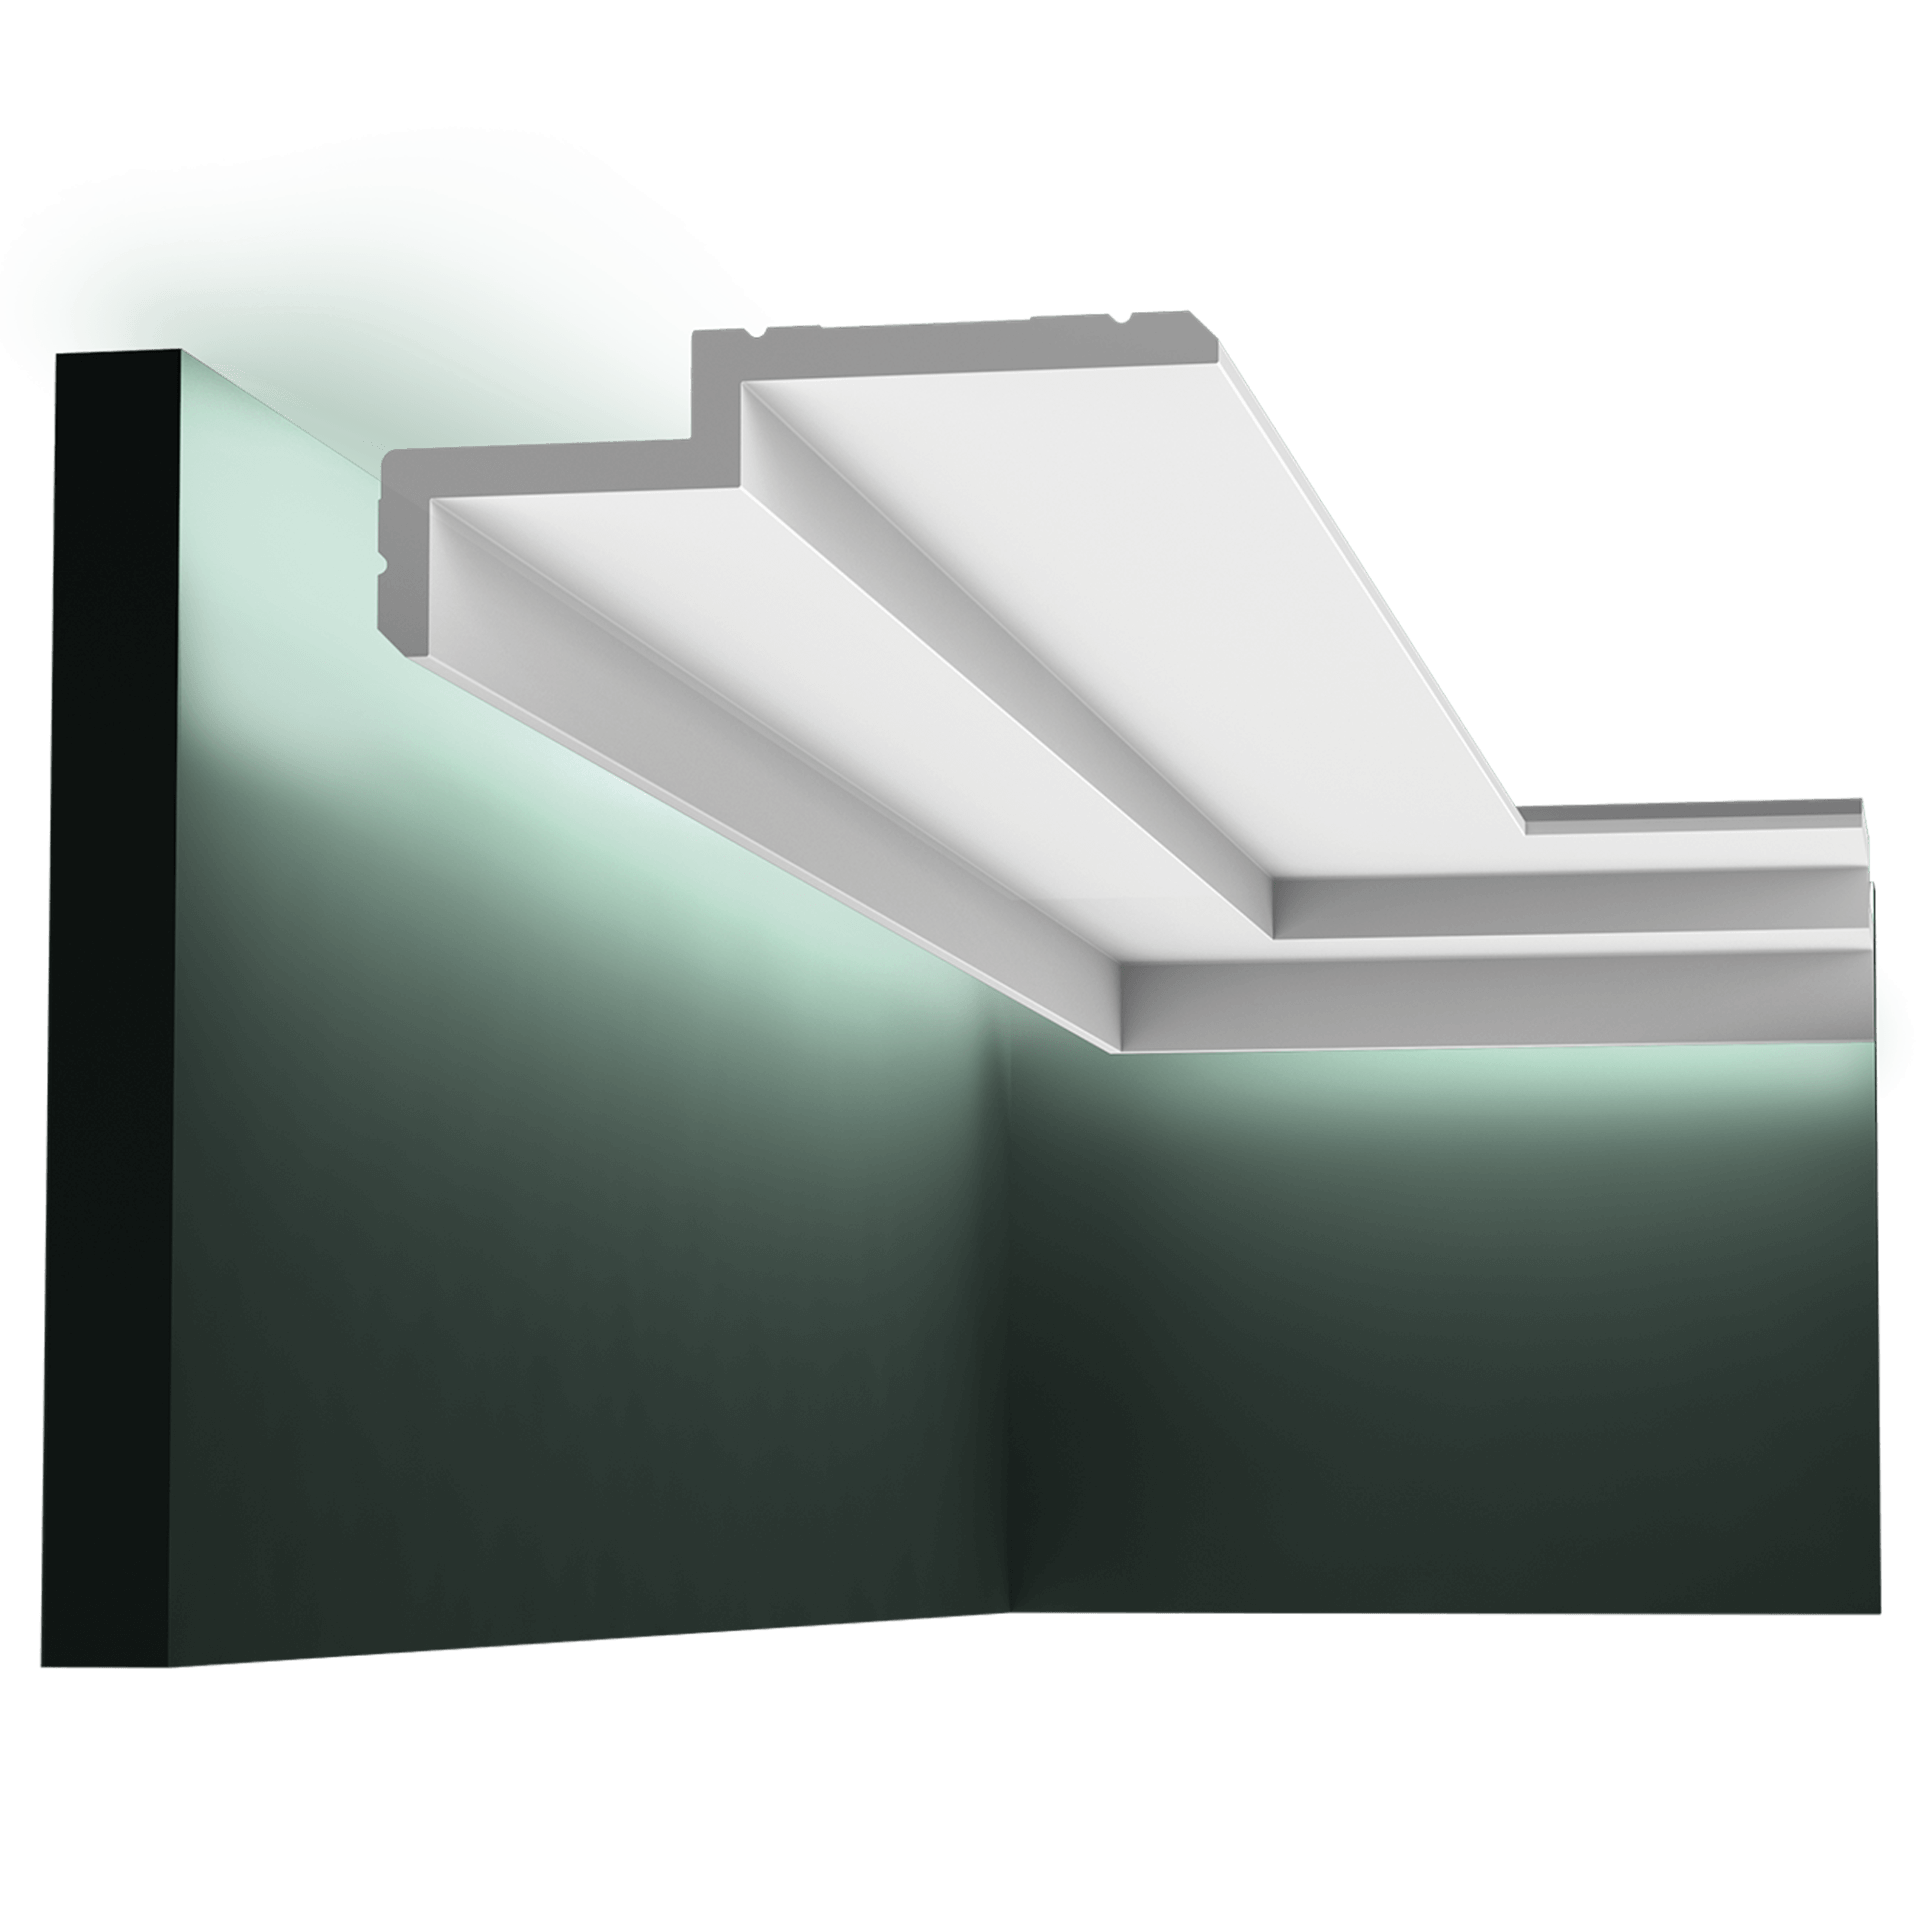 c391 downlighter 5062 This clean, modern profile from the Steps range can also be used to conceal LED lighting. The angled corners above and below provide additional subtle shadow lines. Designed by Orio Tonini.